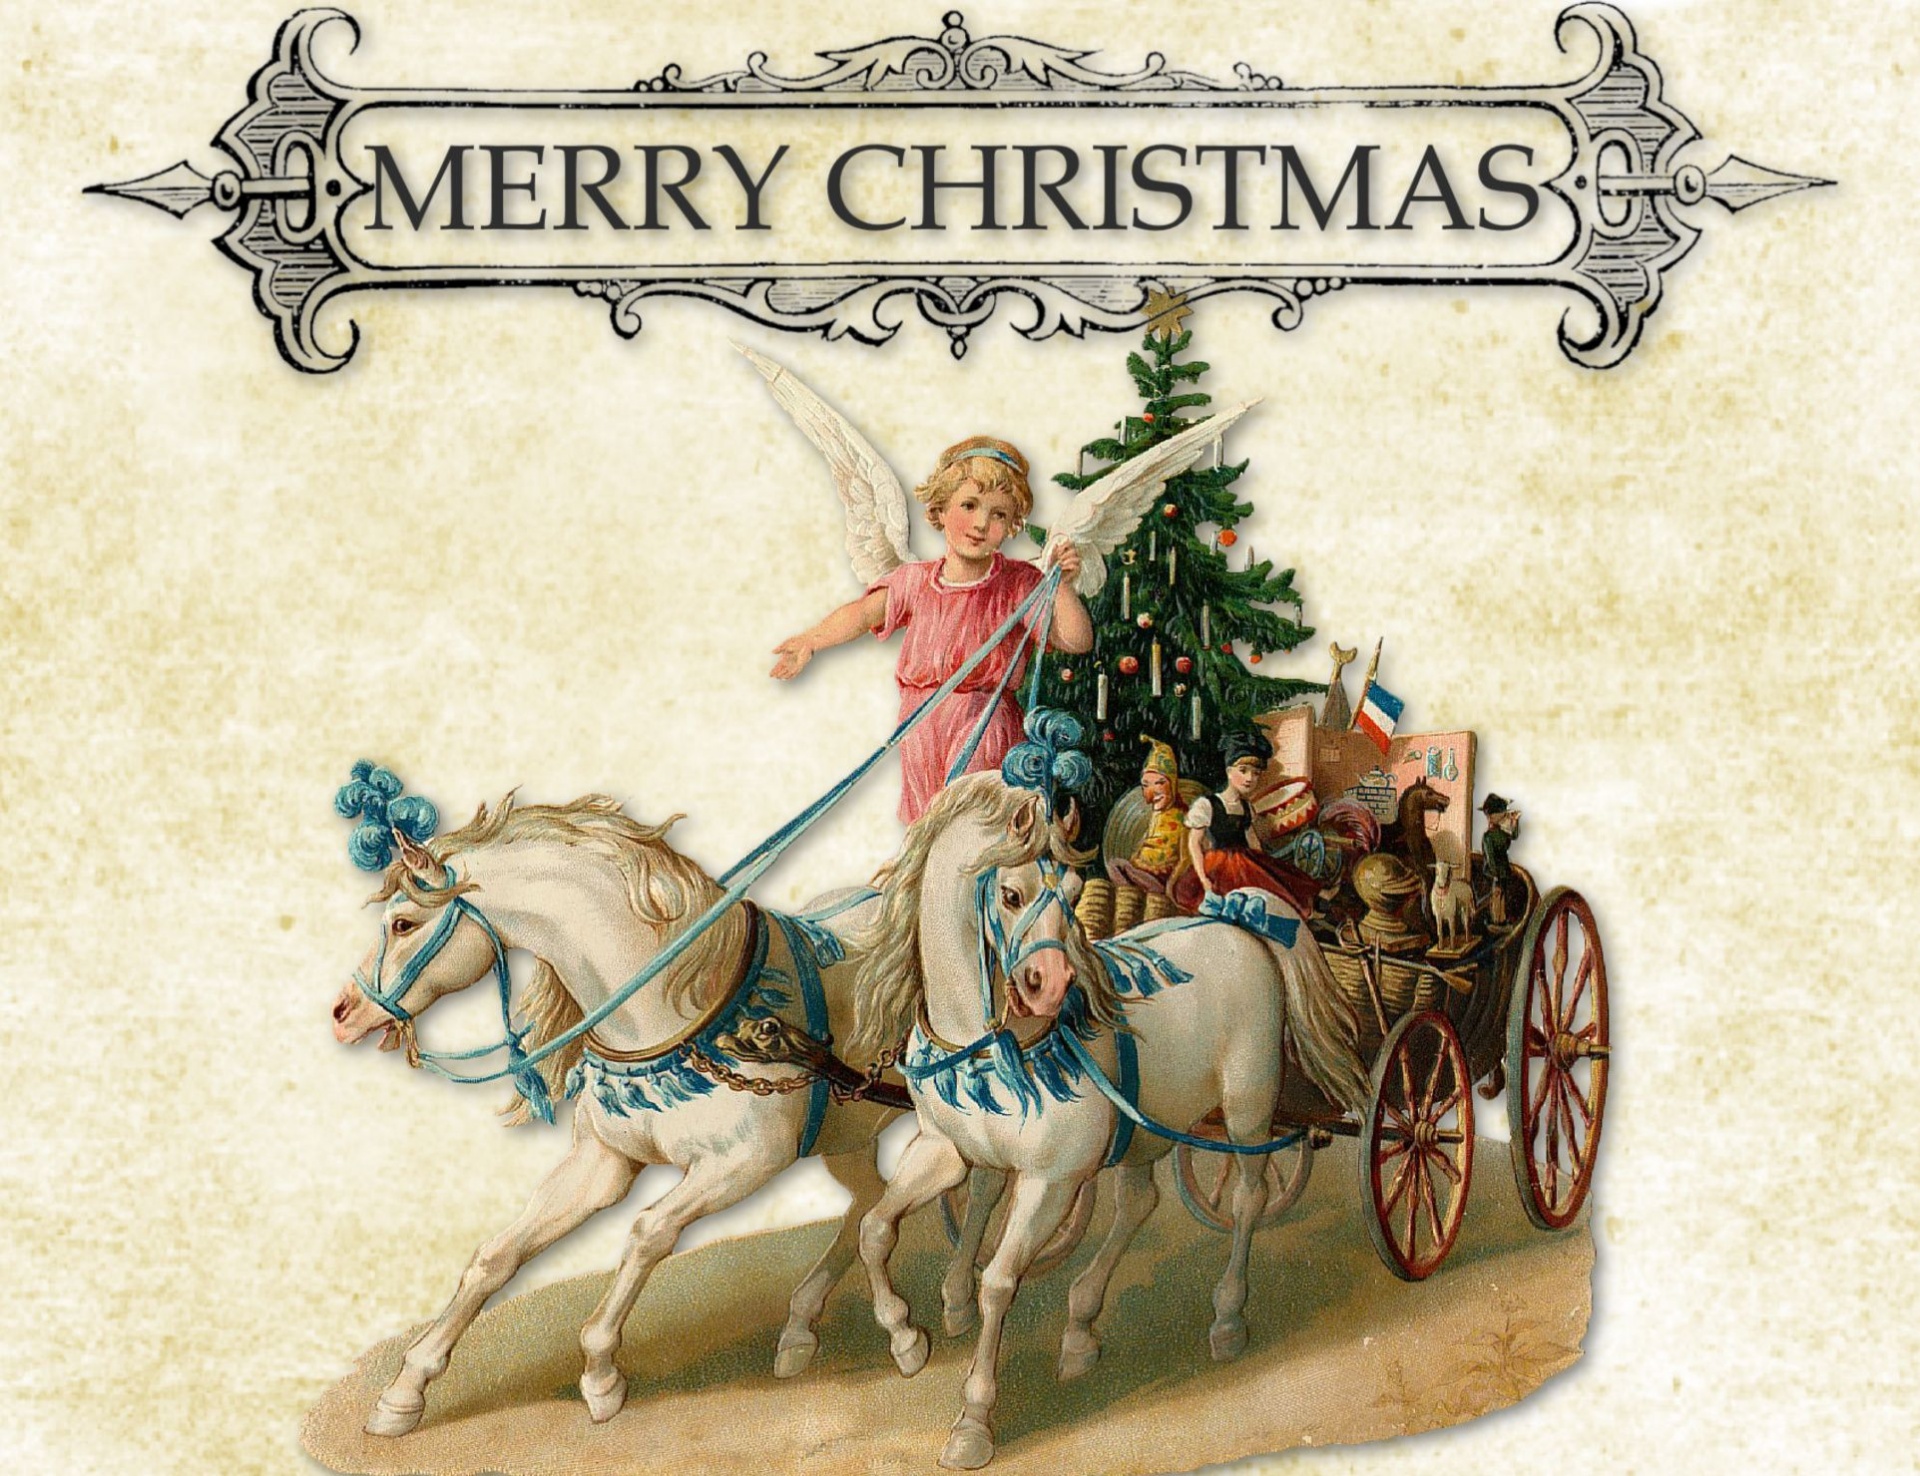 Victorian Vintage illustration of an angel on a horse-drawn carraige full of gifts and a Christmas Tree